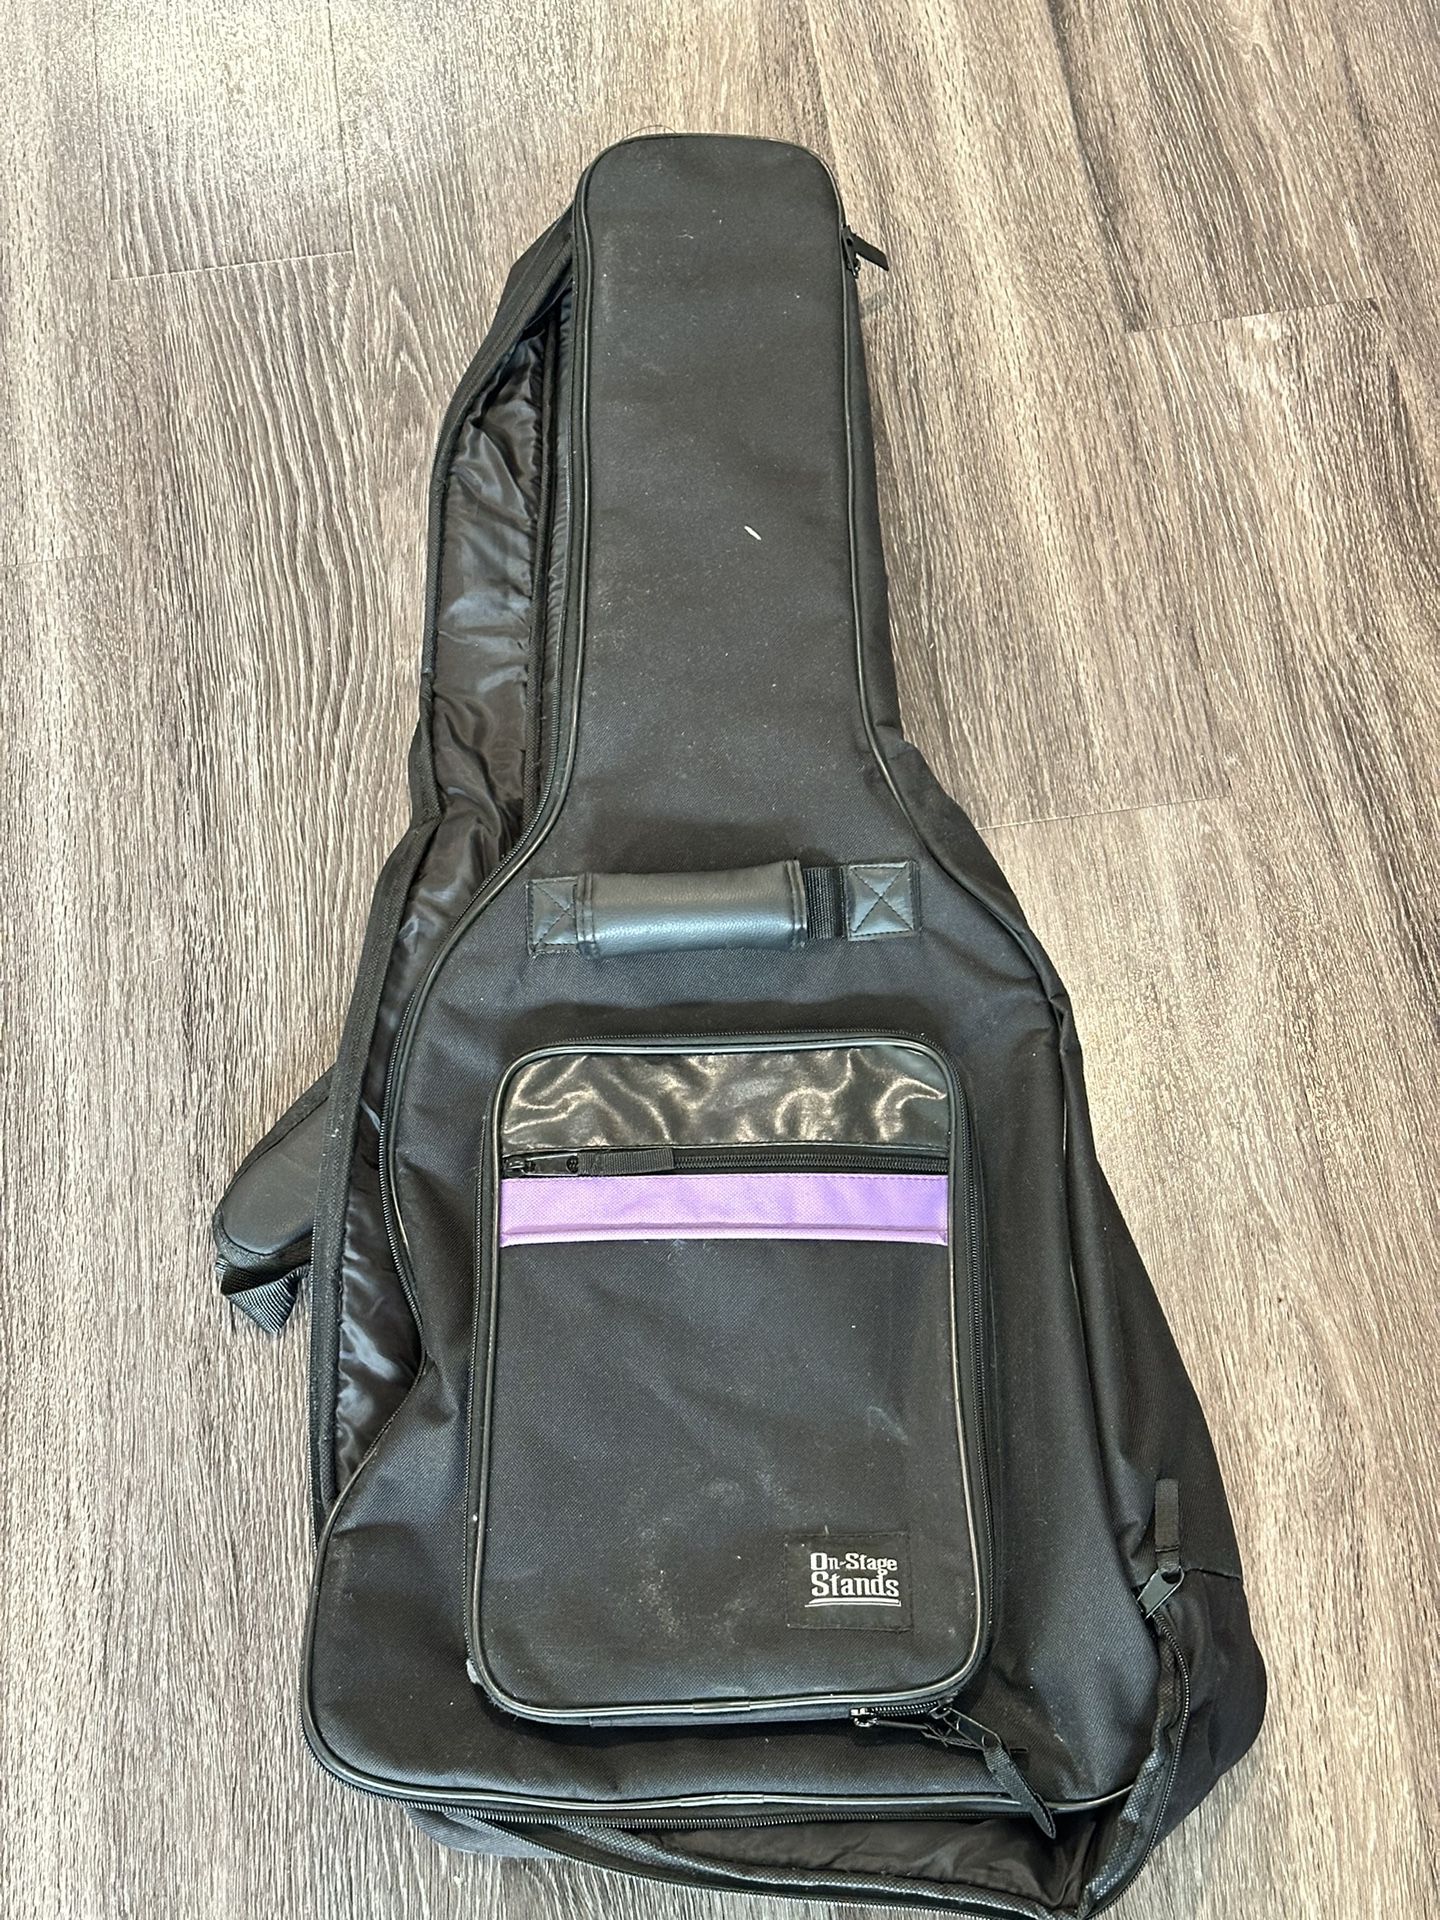 FREE Soft Shell Electric Guitar Case